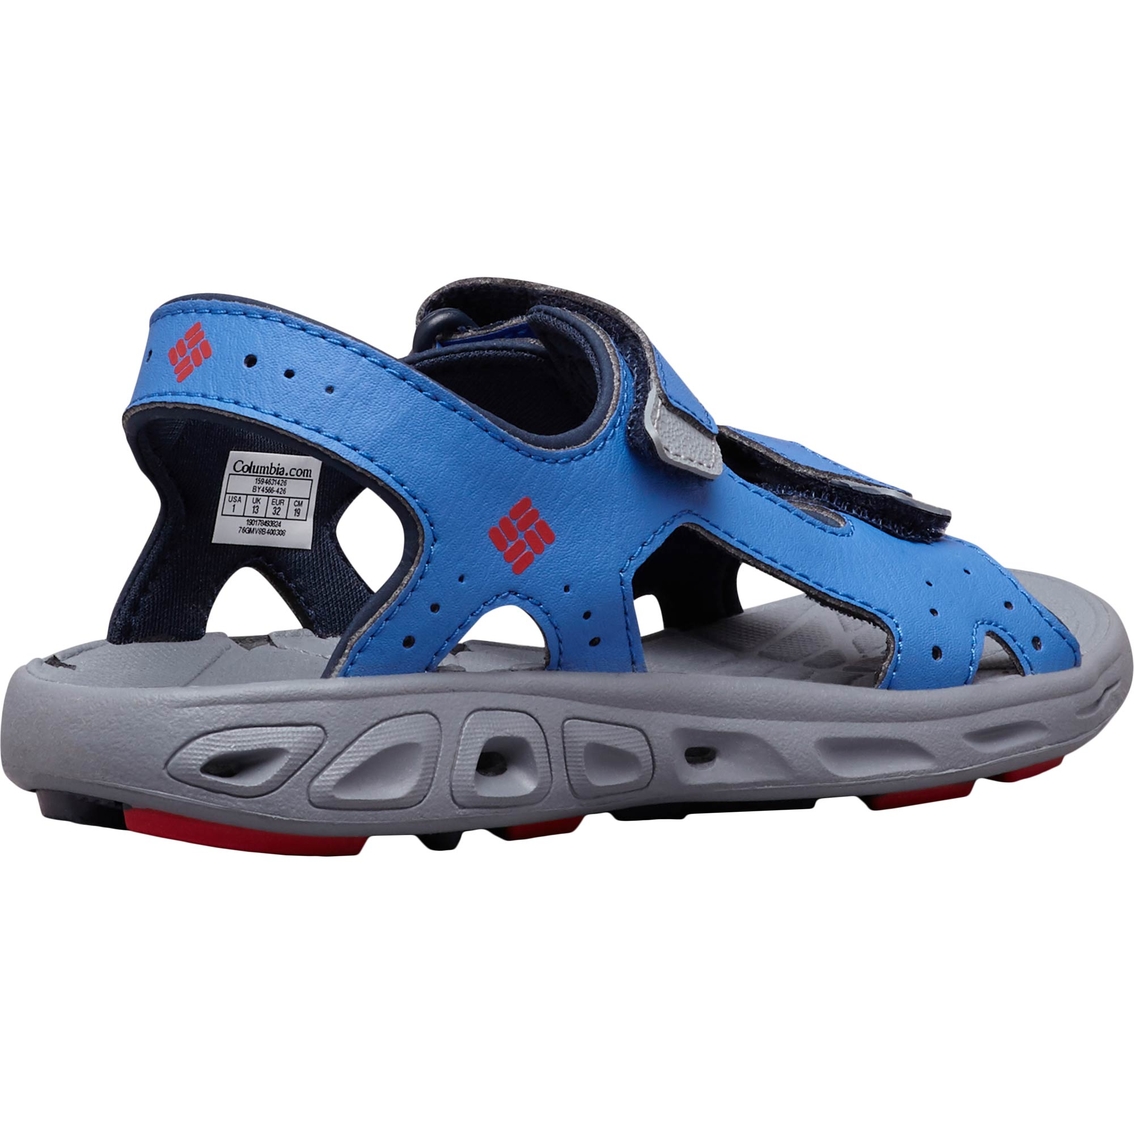 Columbia Kids Techsun Vent Sandals - Image 4 of 6